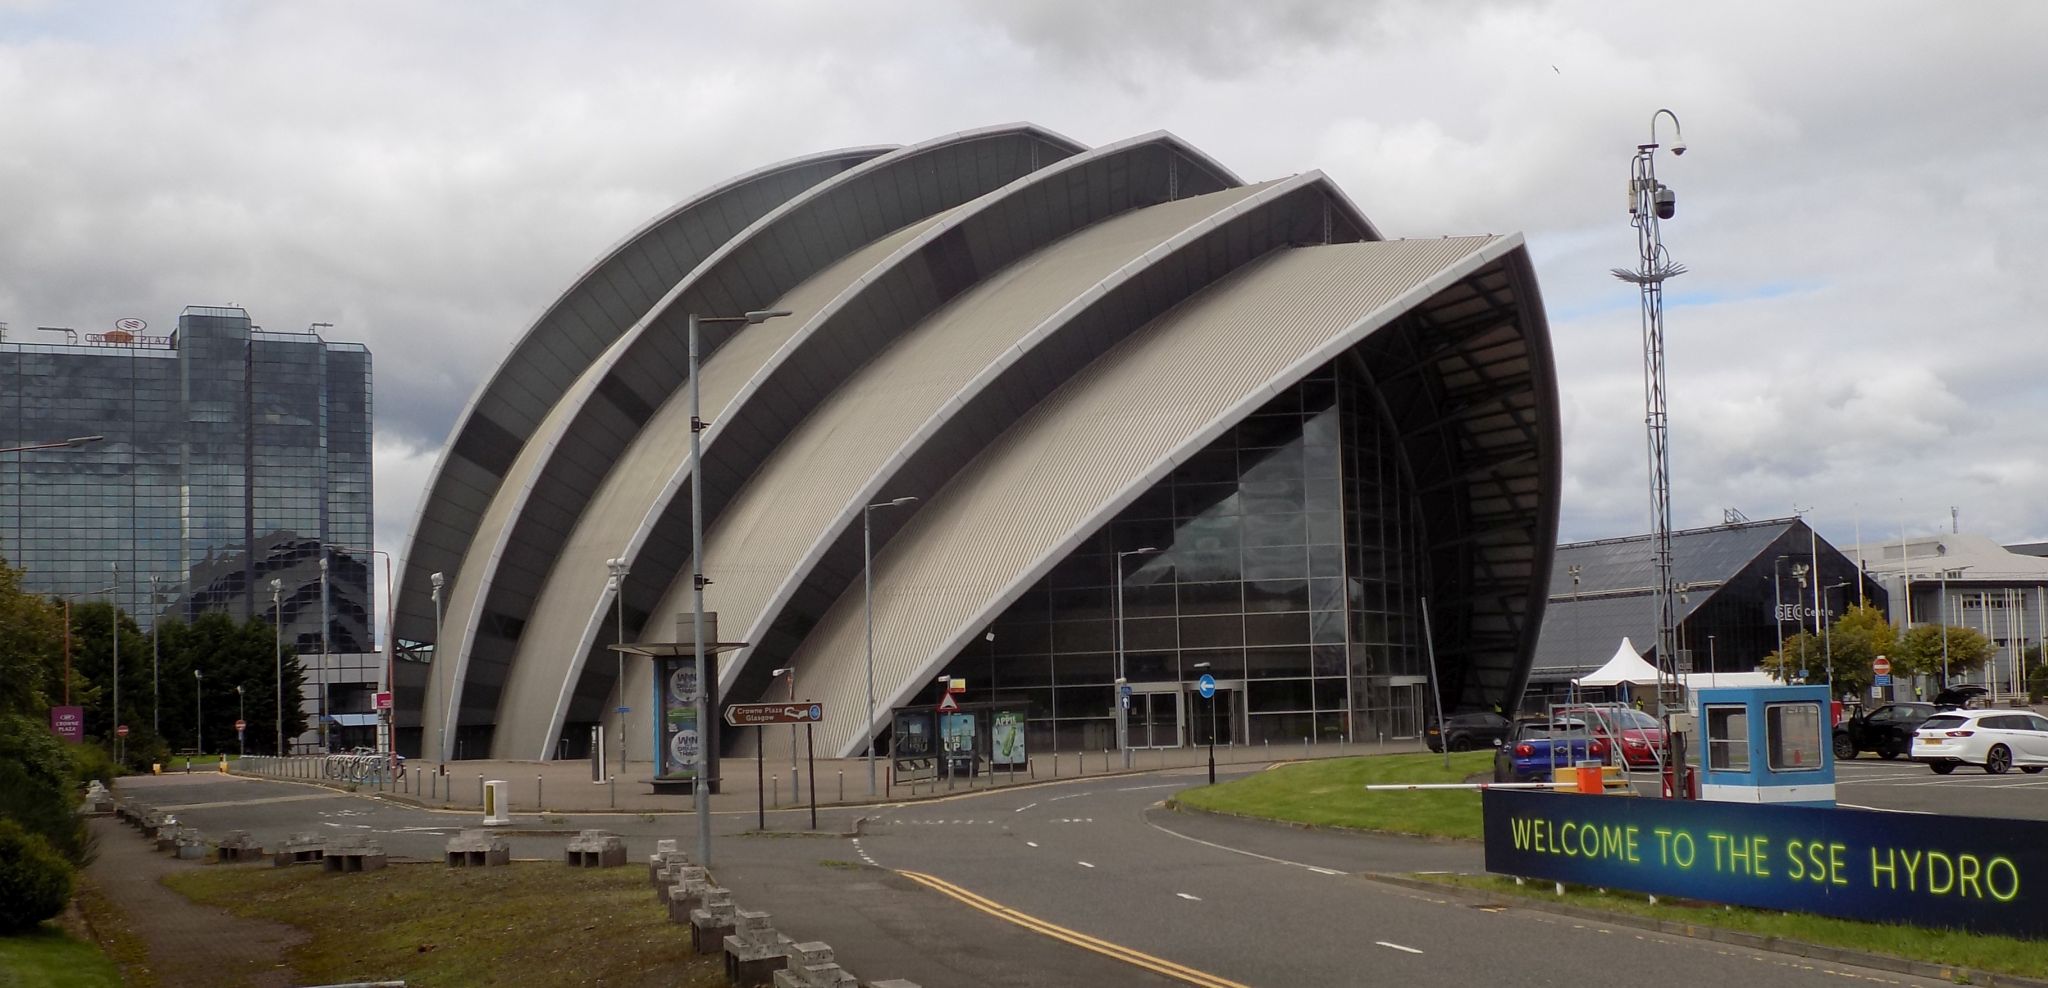 The Armadillo Building in the SECC across the River Clyde from the Glasgow Science Centre